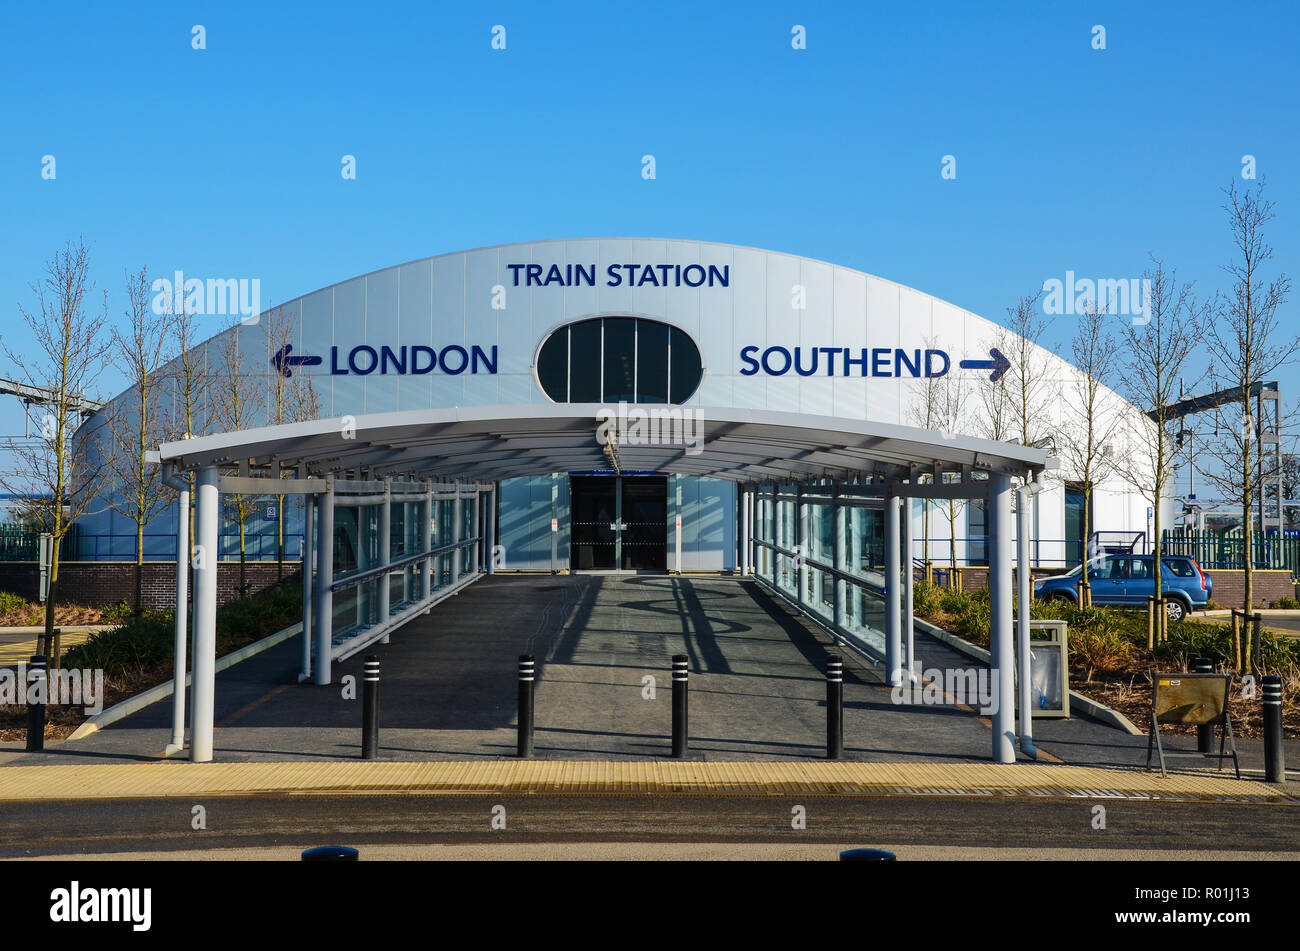 London Southend Airport train station indicating direction arrow London and Southend. Railway station covered walkway. Greater Anglia rail service Stock Photo